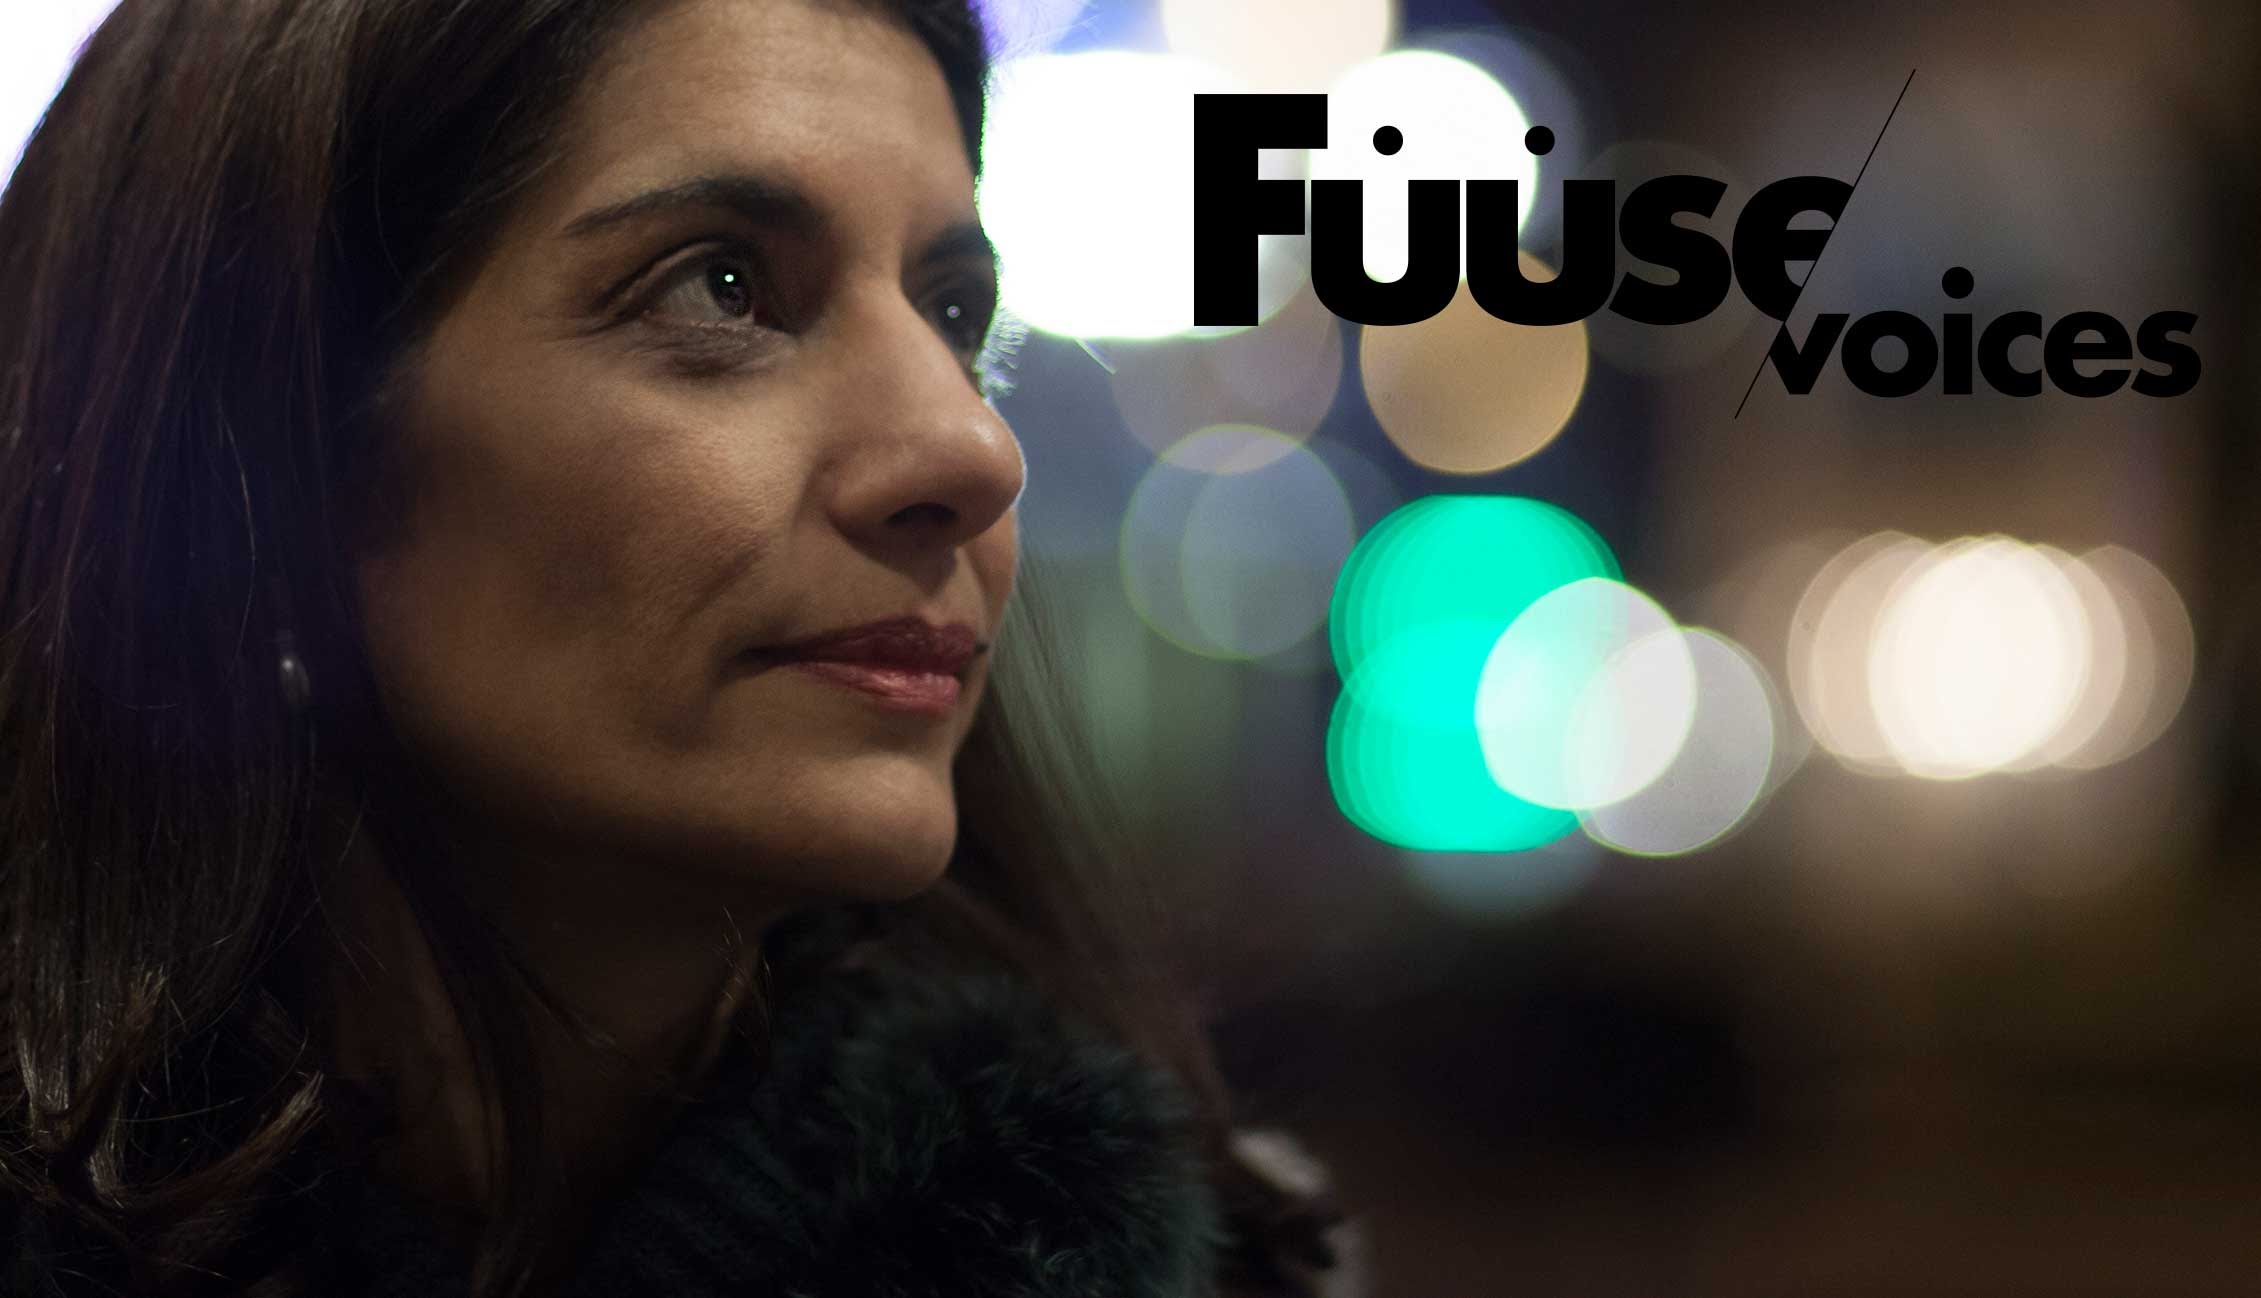 Sanam Naraghi-Anderlini, a video profile by Fuuse